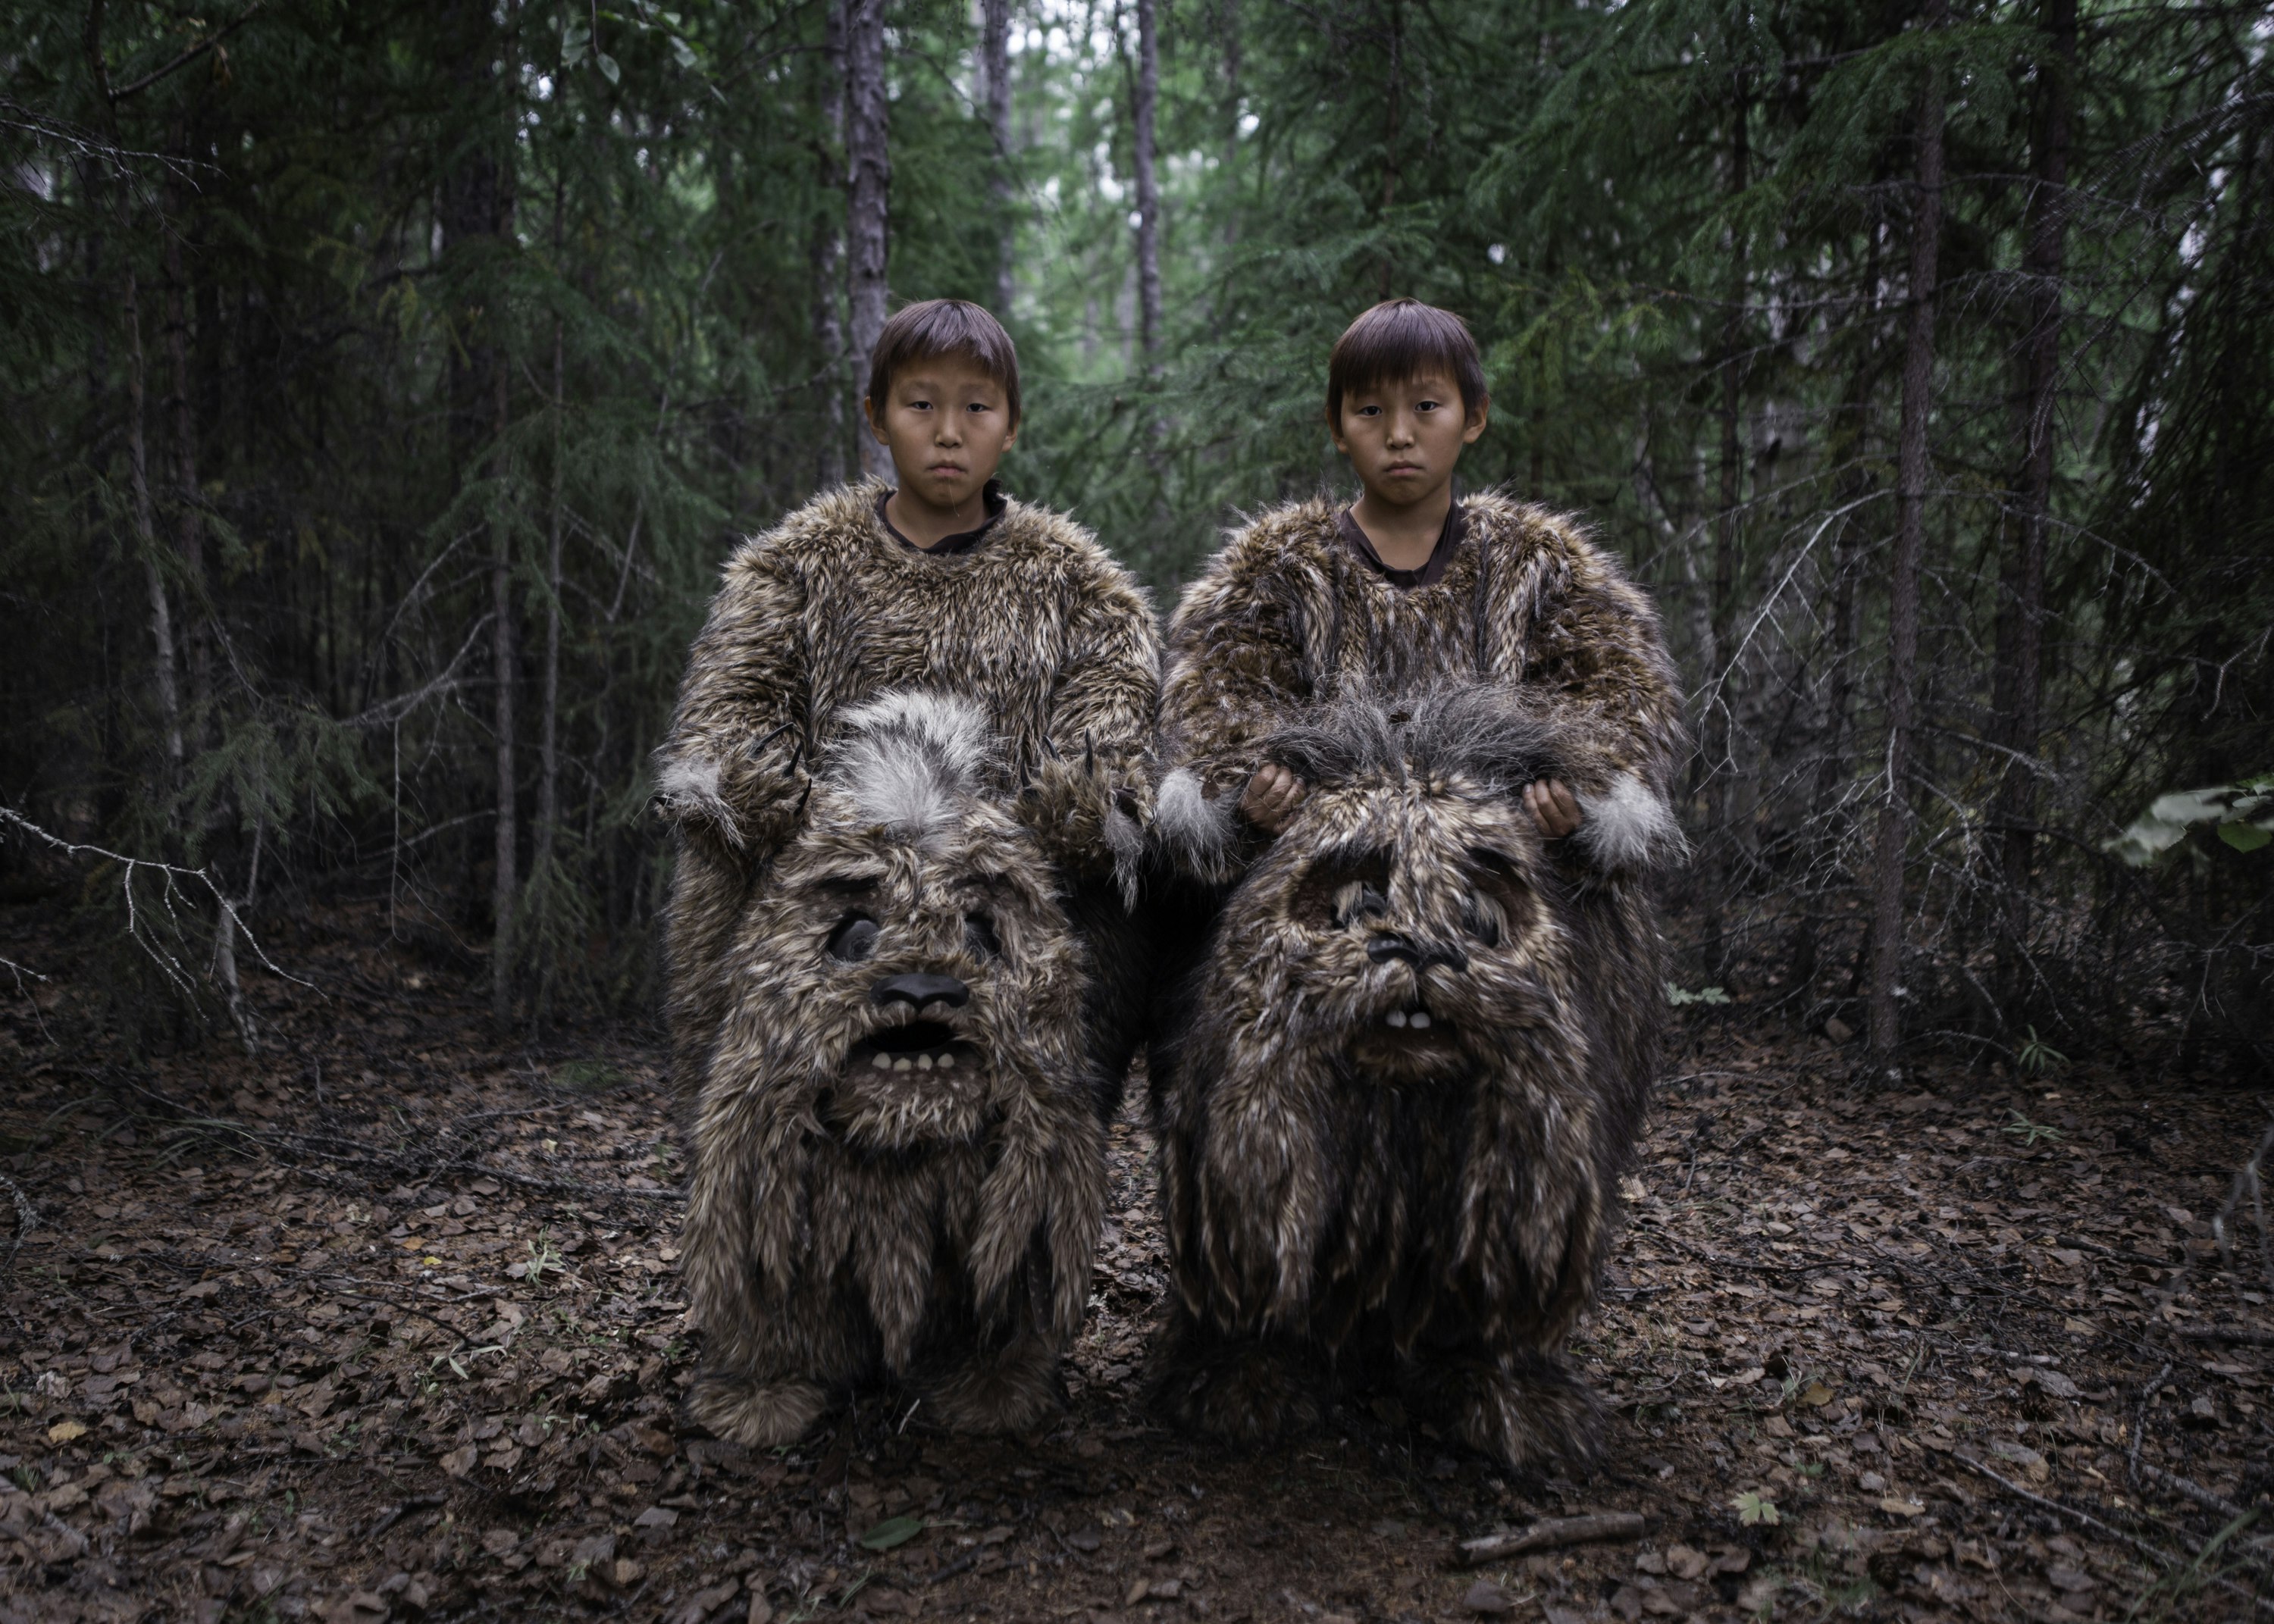 Two young boys dressed up in bear costumes